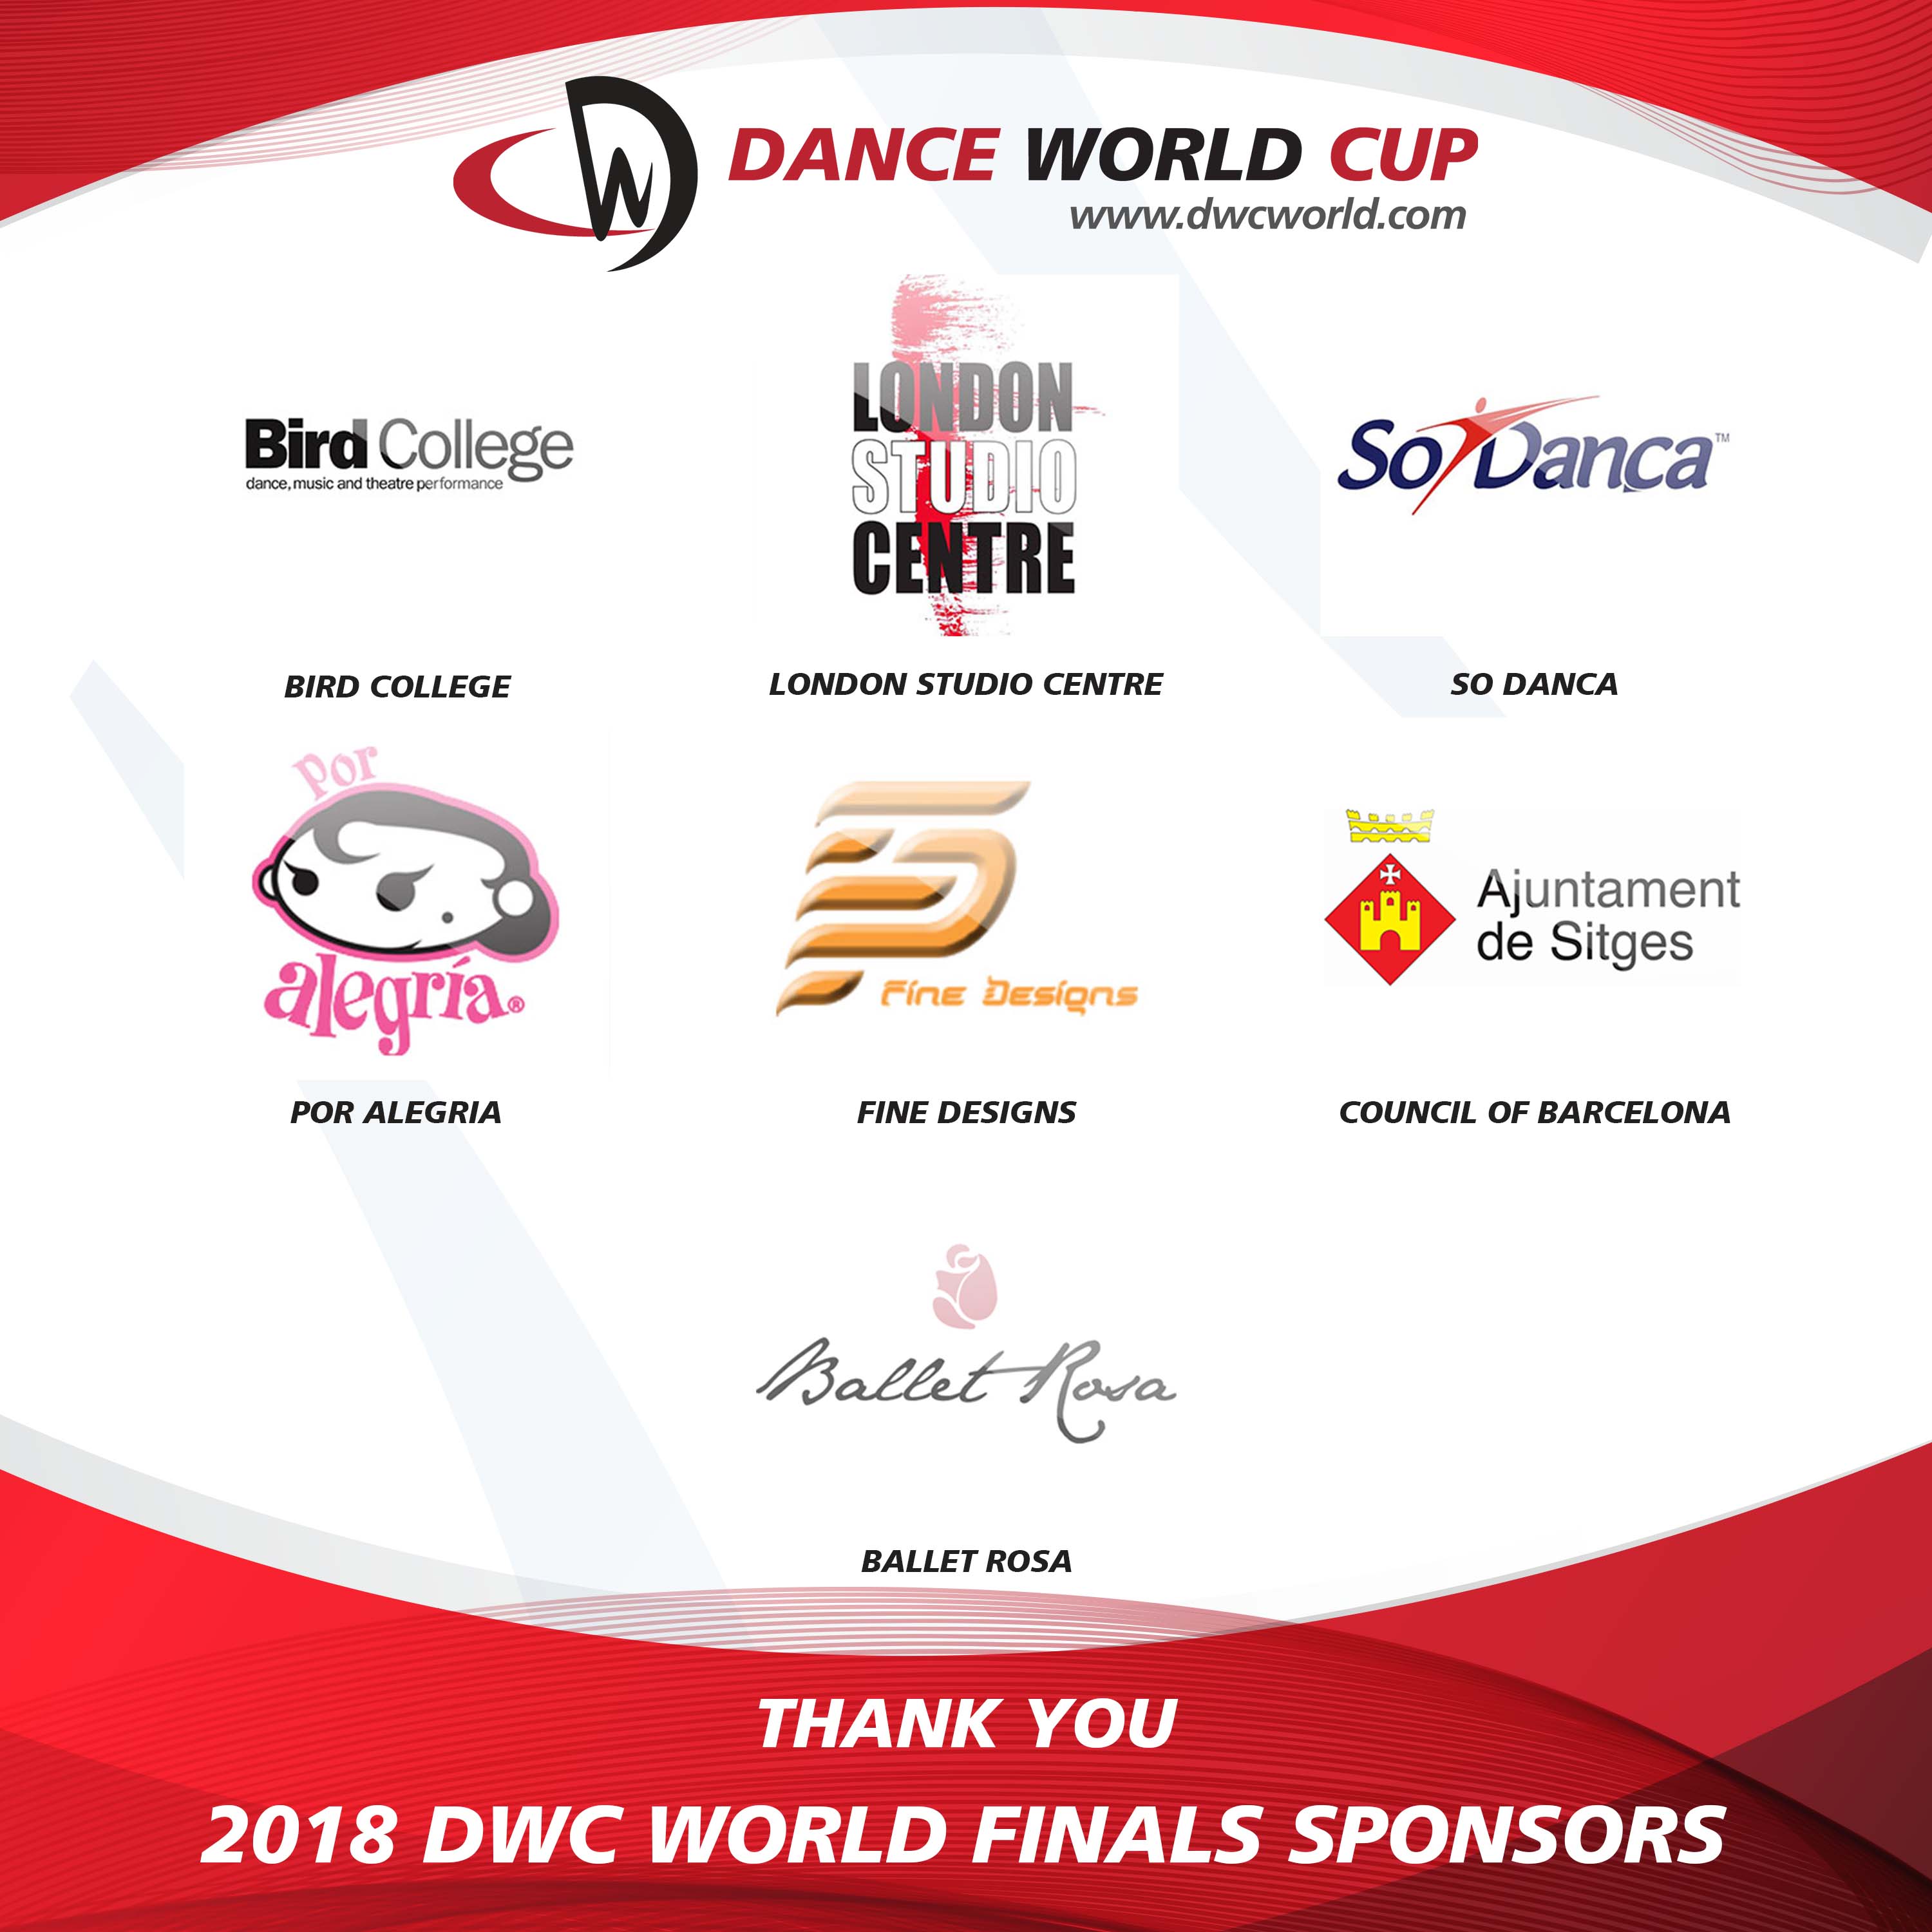 Thank you to our 2018 DWC World Finals Sponsors